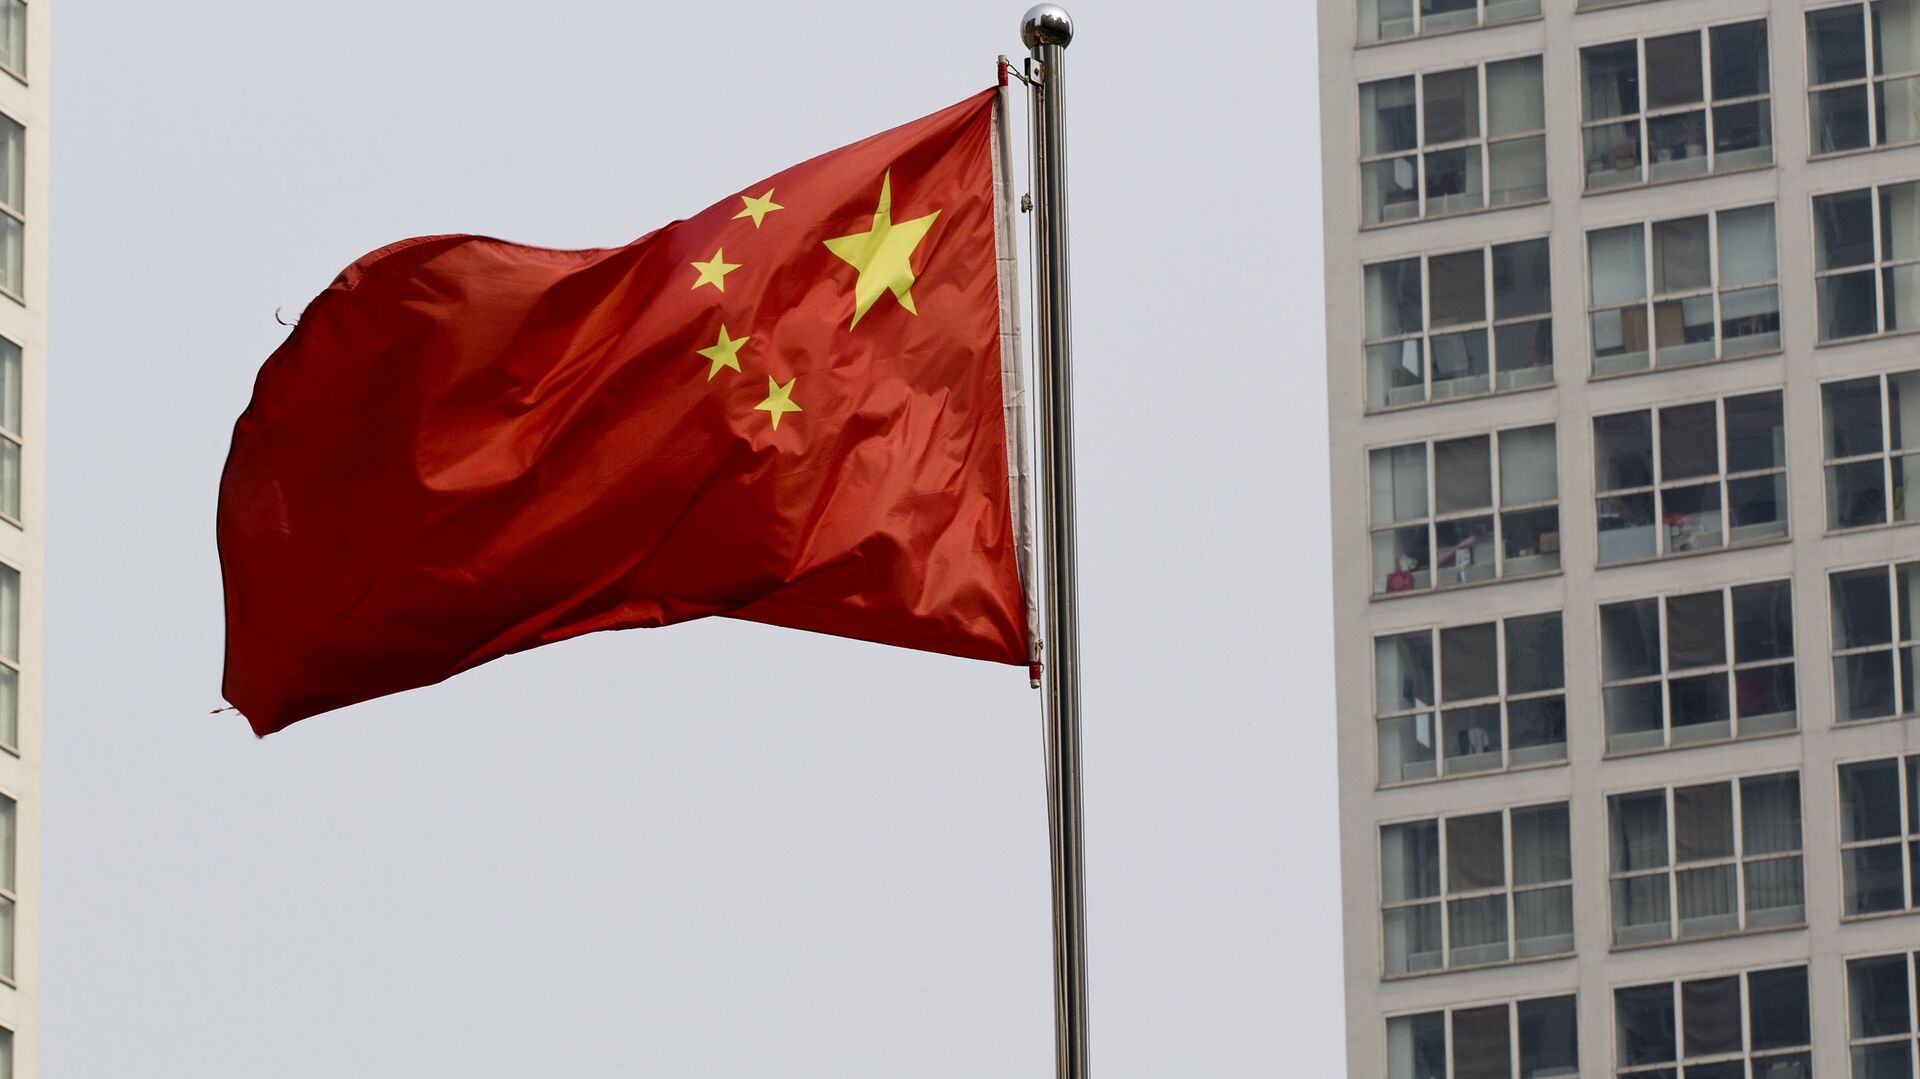 A Chinese national flag flutters in the wind in between a high-rise residential and office complex in Beijing, China. (File) - Sputnik Moldova-România, 1920, 07.05.2022